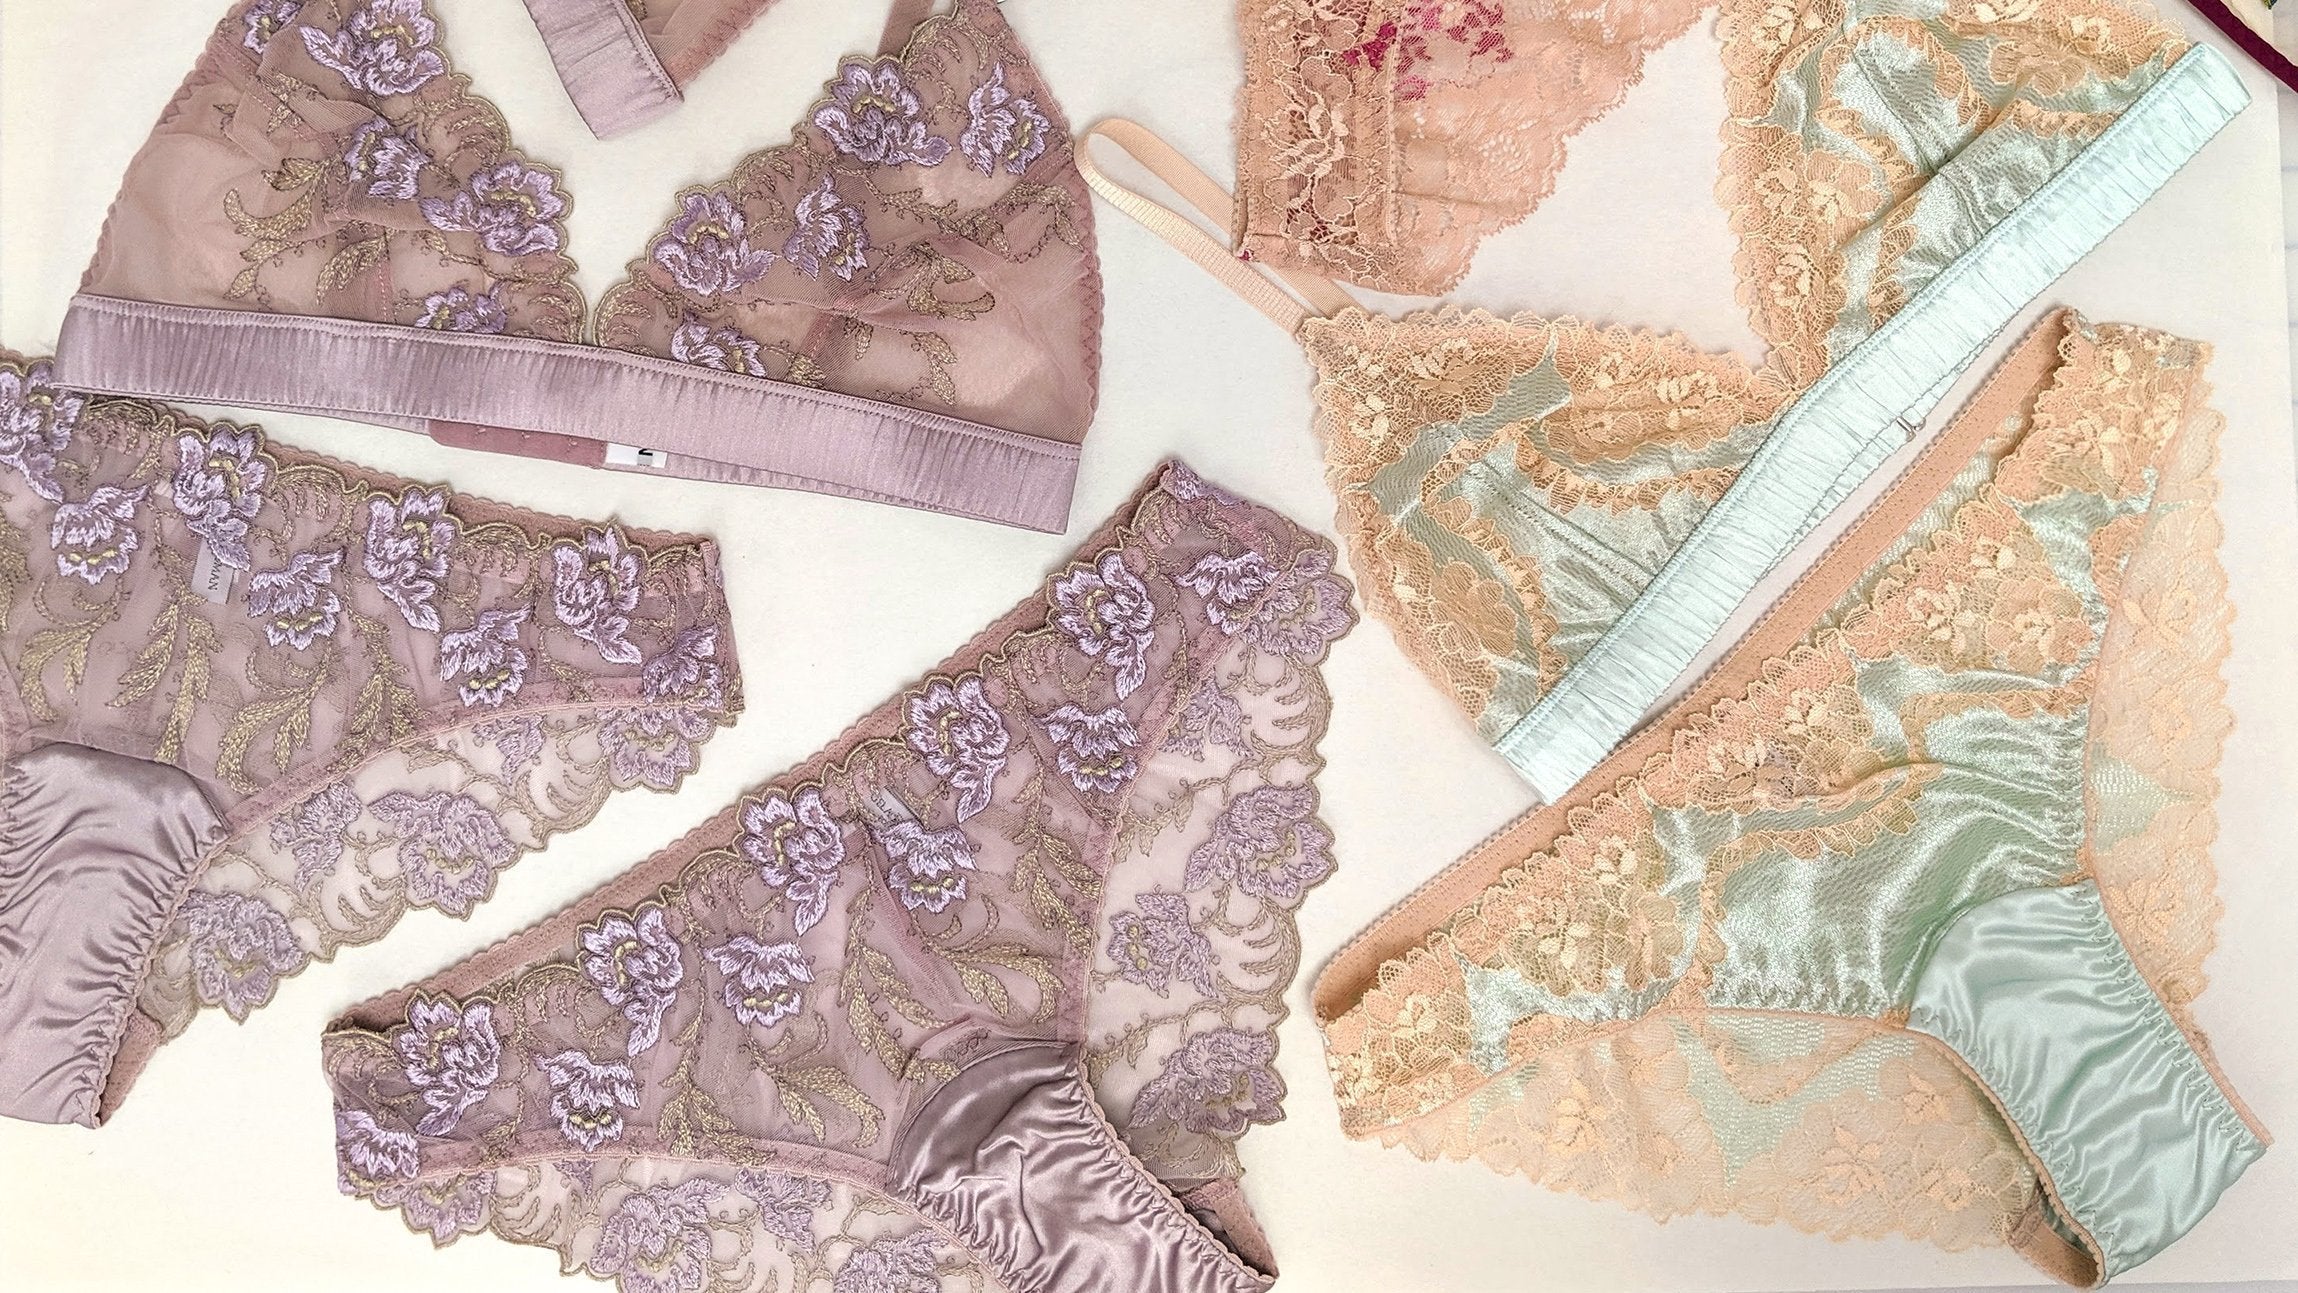 Silk lingerie sets with pastel lace and embroidery